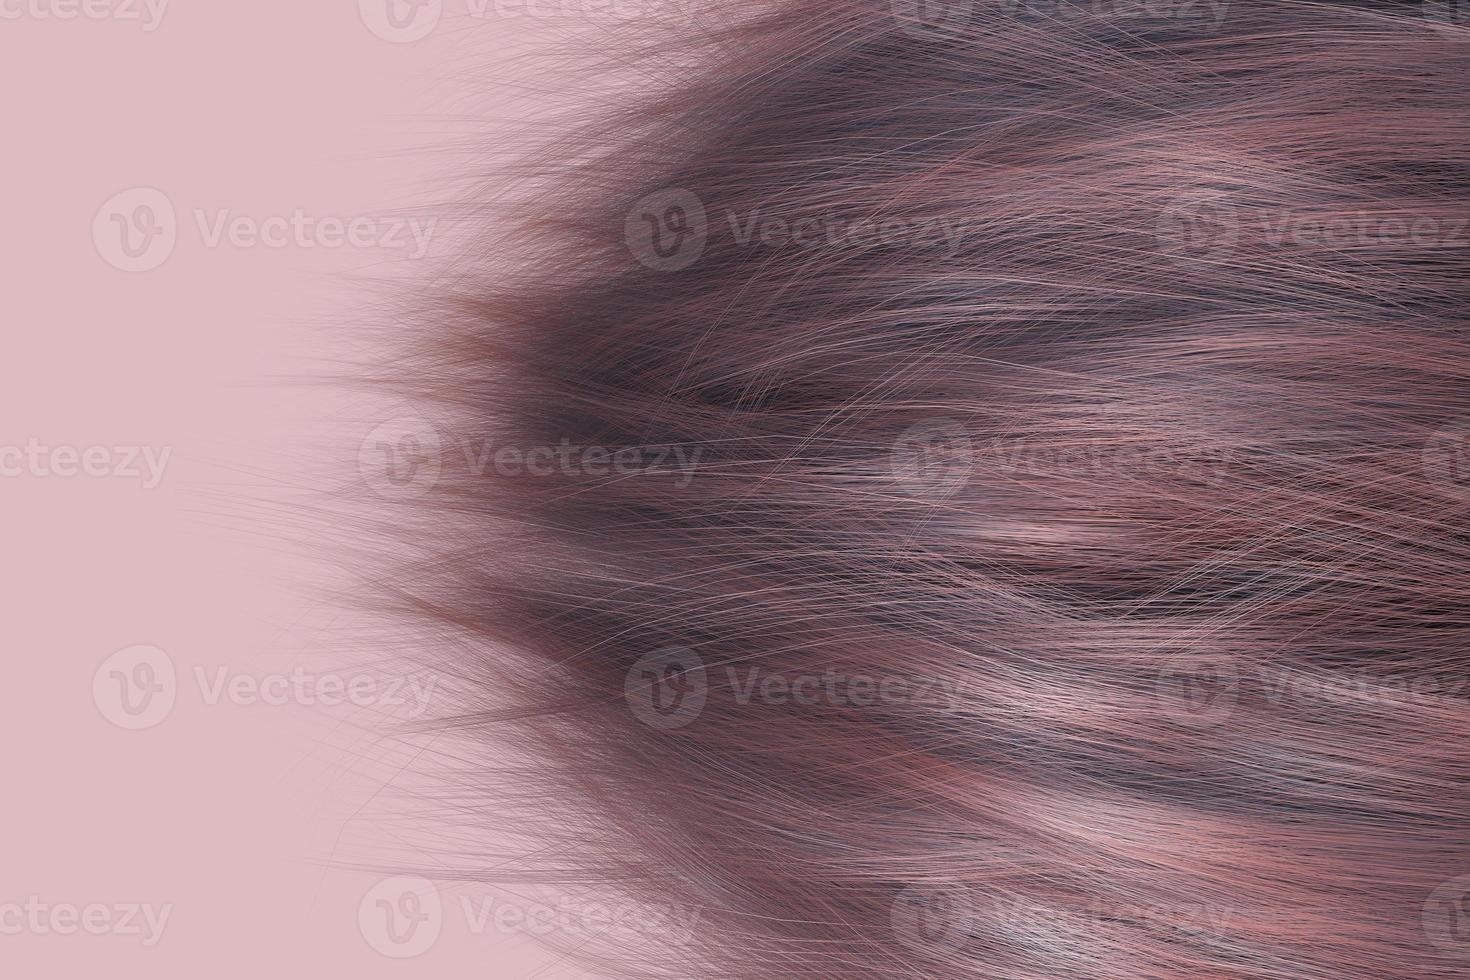 Brown smooth hair flow 3d rendering. Abstract hairstyle background. Curly fashion texture photo